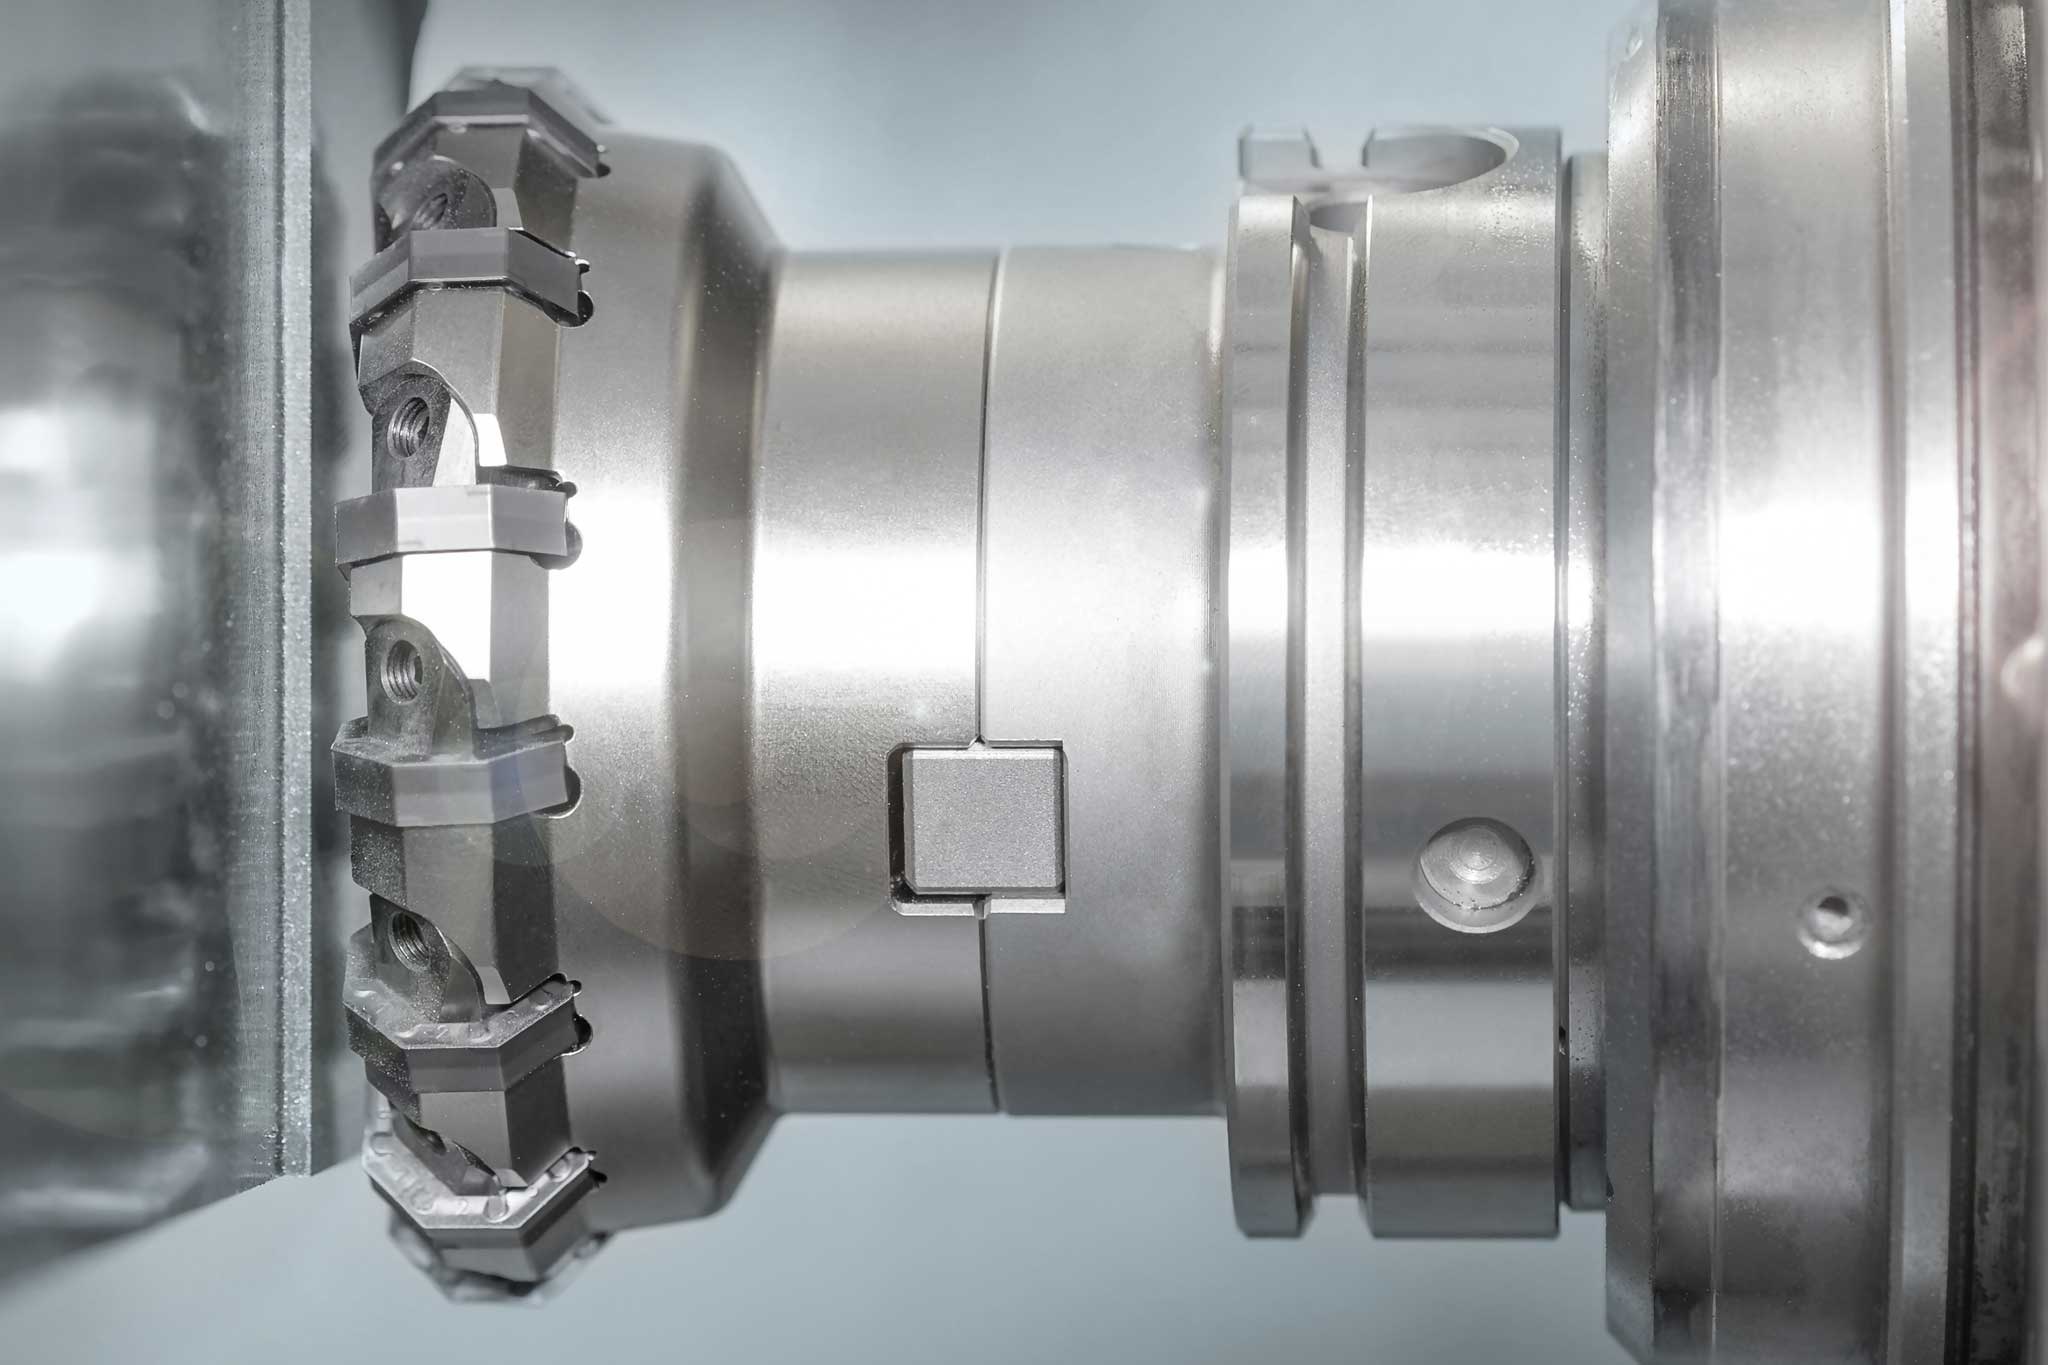 A NeoMill face milling cutter during machining.